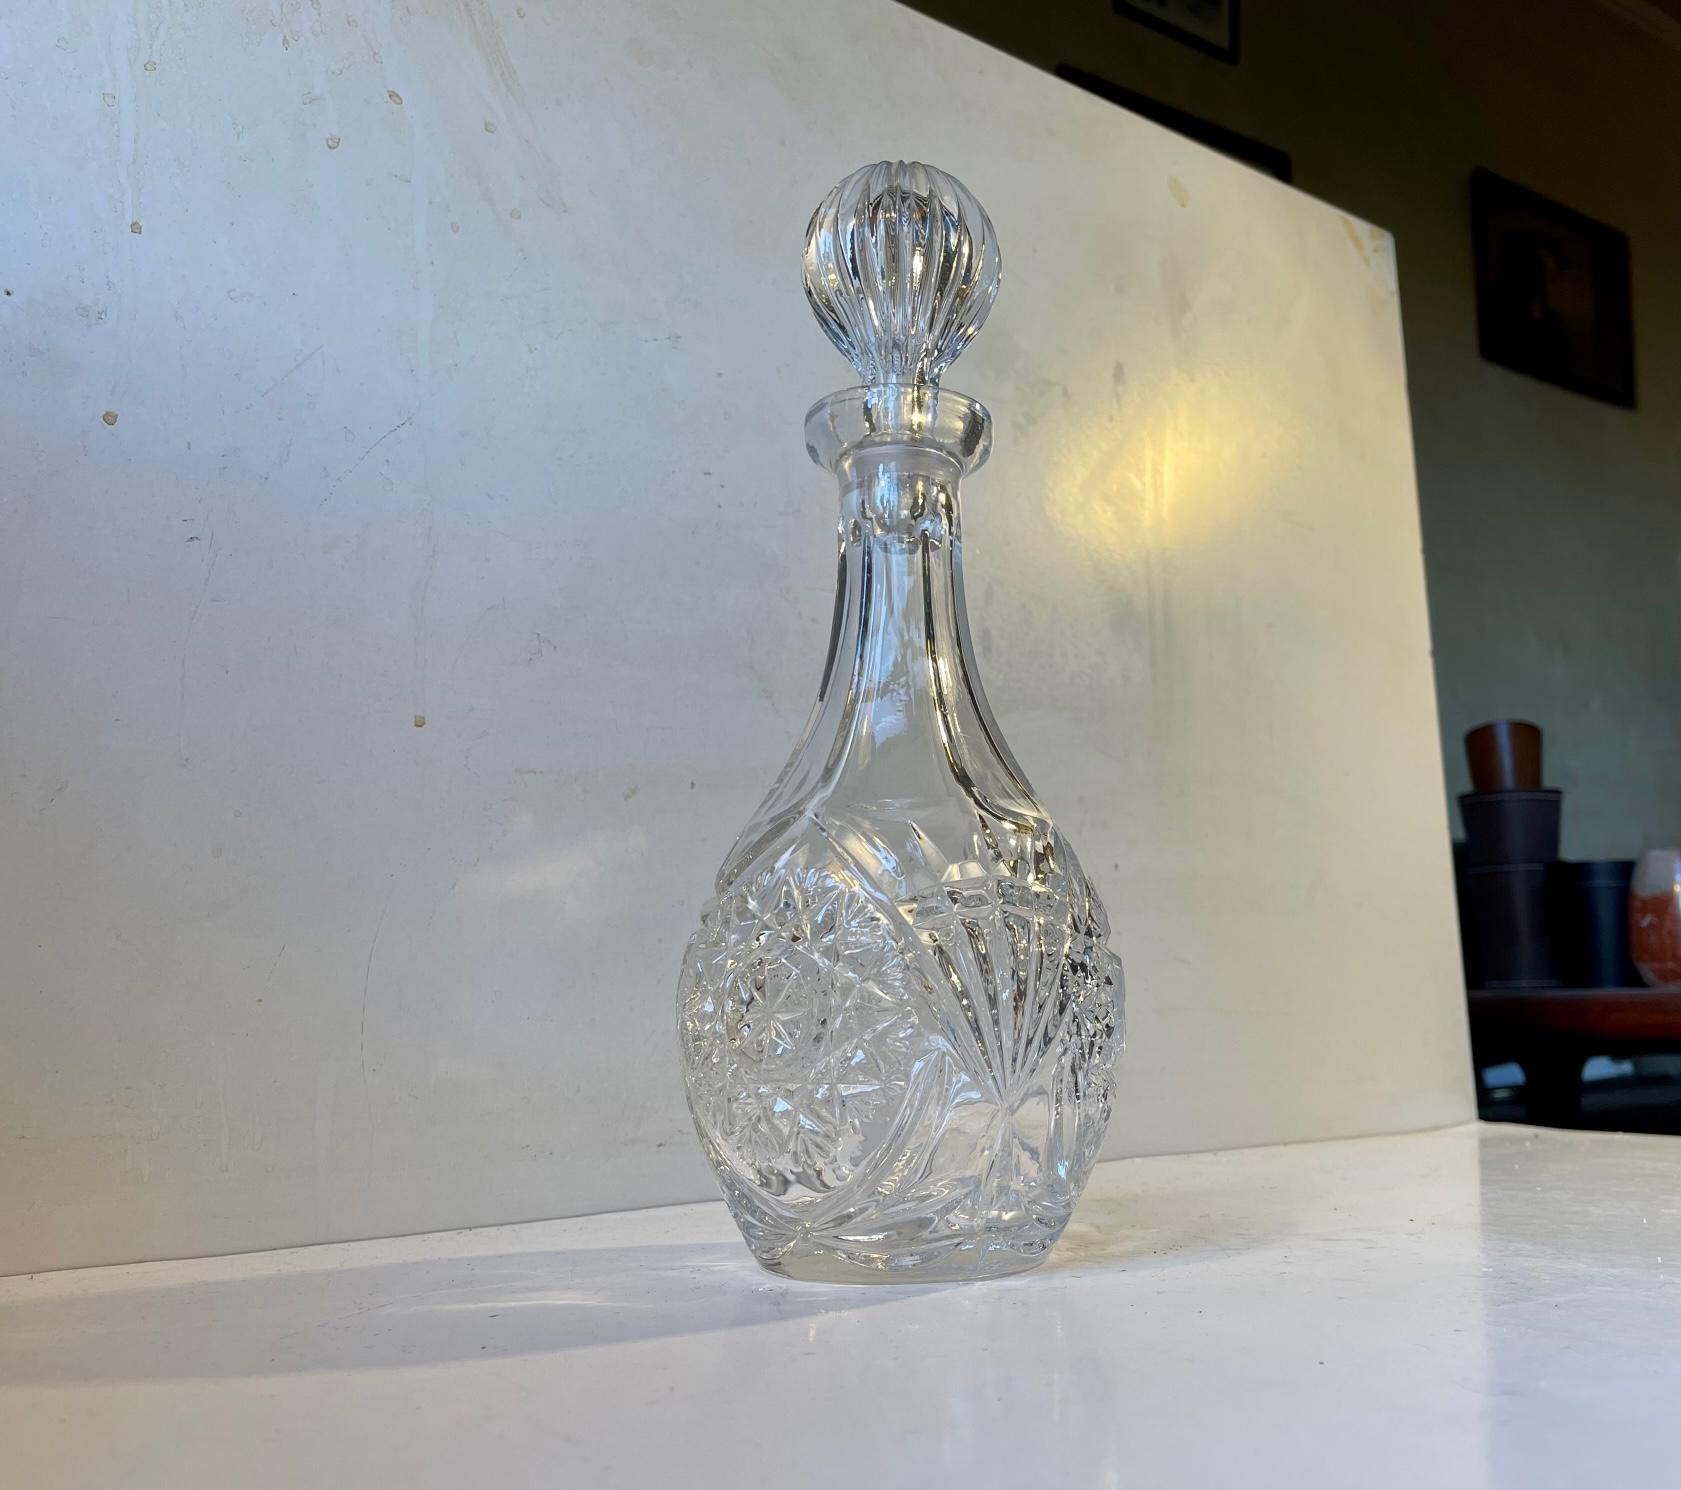 Decorative clear crystal decanter with fluted spherical stopper. Made in Bohemia/Czech Republic during the 1970s. NOS - new old stock and has never been in use. It has a capacity of 0.7 liters. Measure: Height: 31 cm.